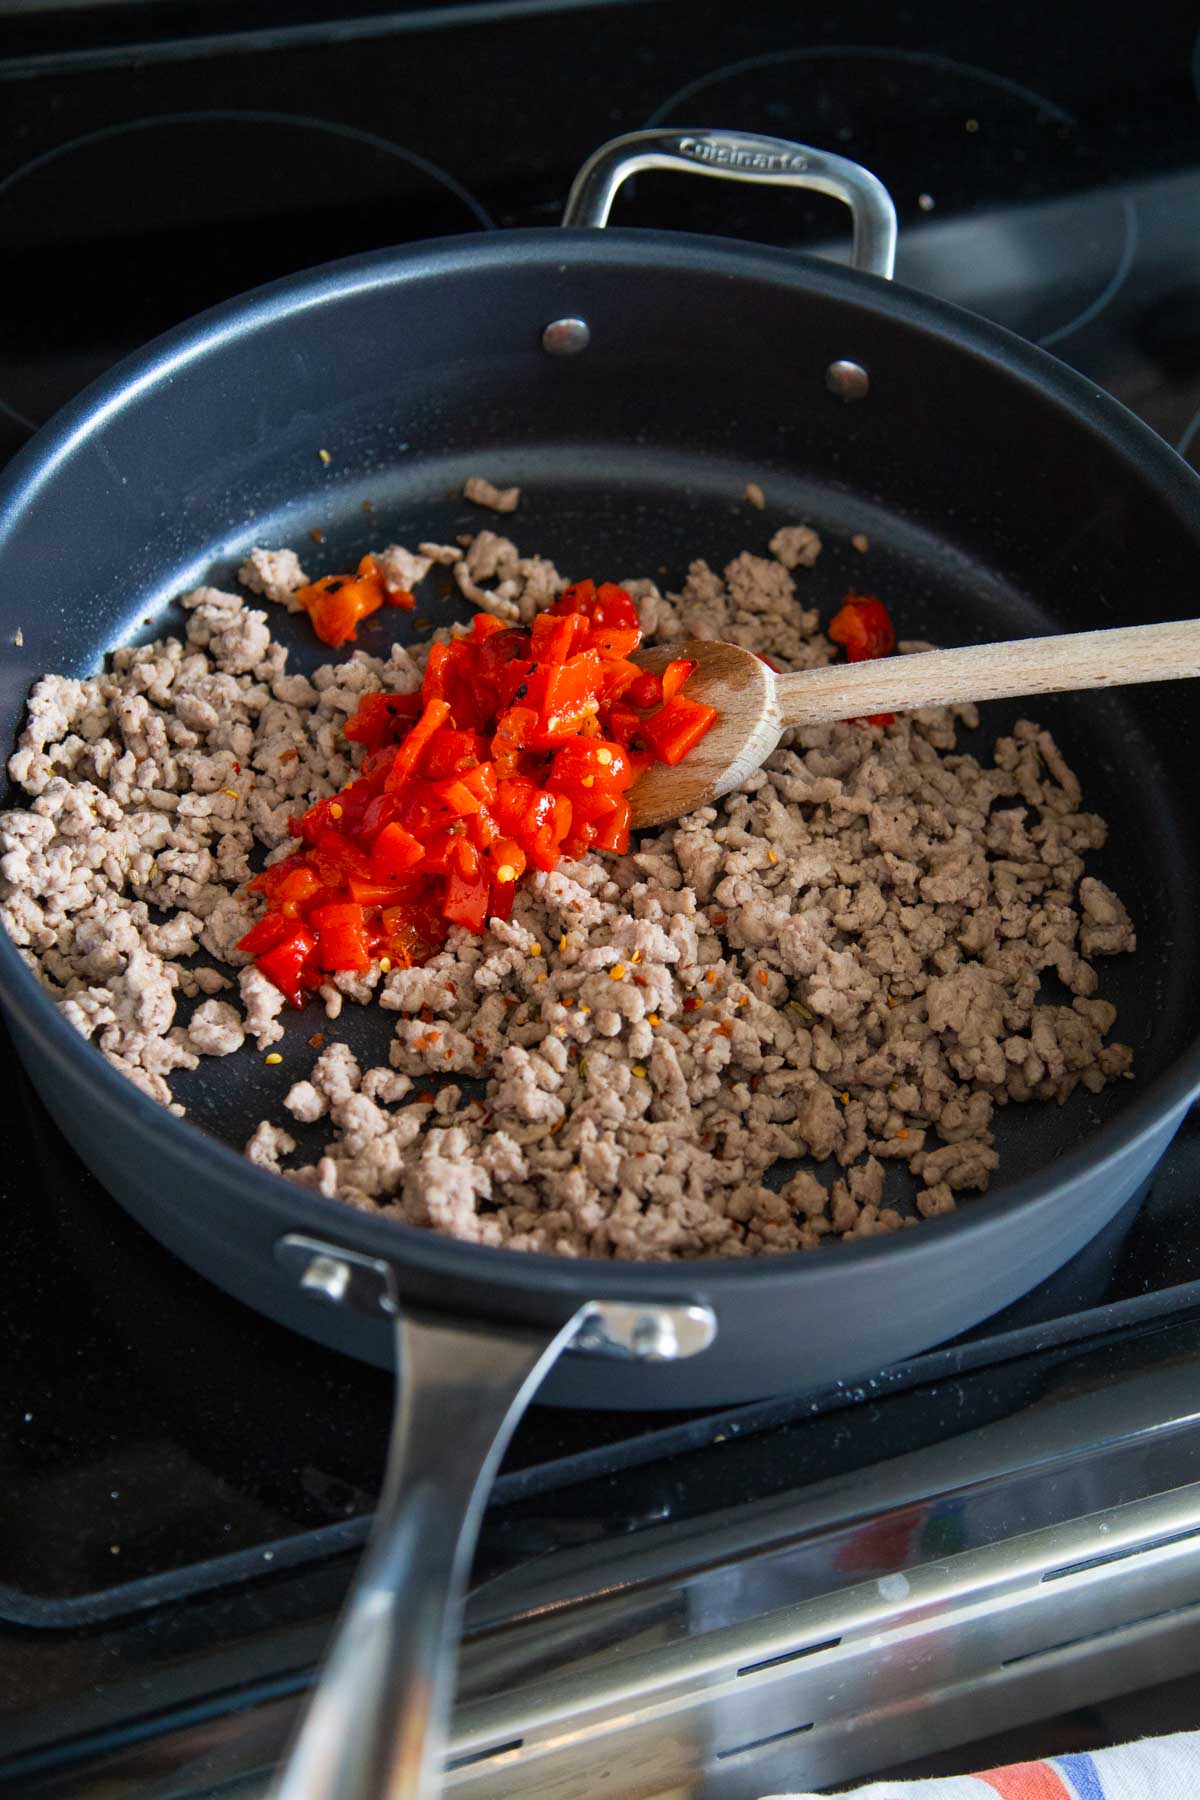 A skillet has browned, crumbled sausage and is mixing in some fresh peppers.